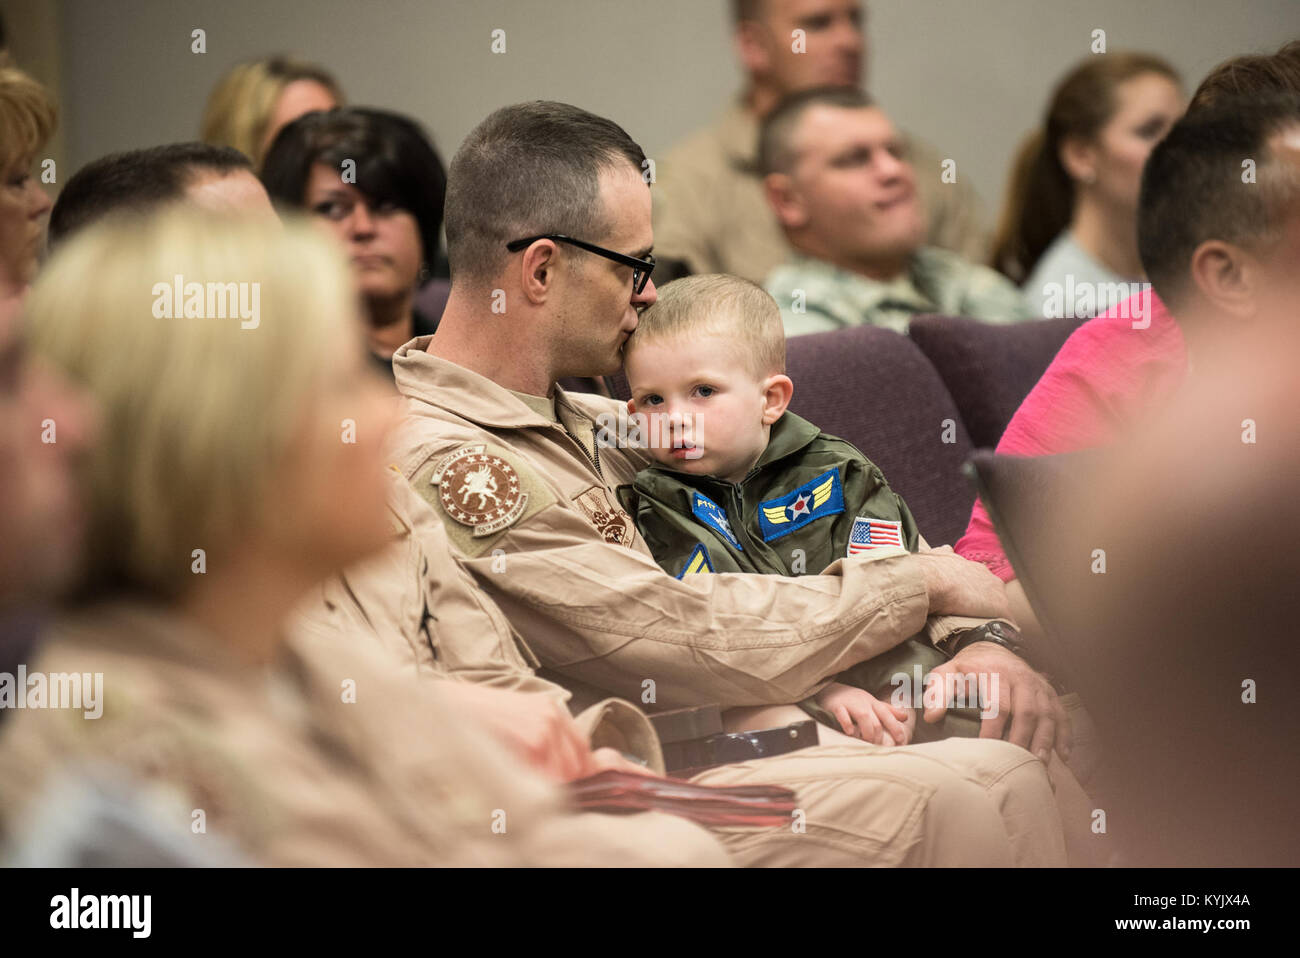 Tech. Sgt. Paul Jones, a C-130 loadmaster in the 123rd Airlift Wing, and his son, Jonathan Paul Jones, attend a briefing at the Kentucky Air National Guard Base in Louisville, Ky., April 24, 2015, prior to Jones' deployment to an undisclosed air base in the Persian Gulf region. Jones and more than 40 other Kentucky Air Guardsmen comprise the third rotation of 123rd Airmen to deploy to the base since February. They will be flying airlift missions throughout the U.S. Central Command Area of Responsibility in support of Operation Freedom's Sentinel, which provides military training and counterter Stock Photo